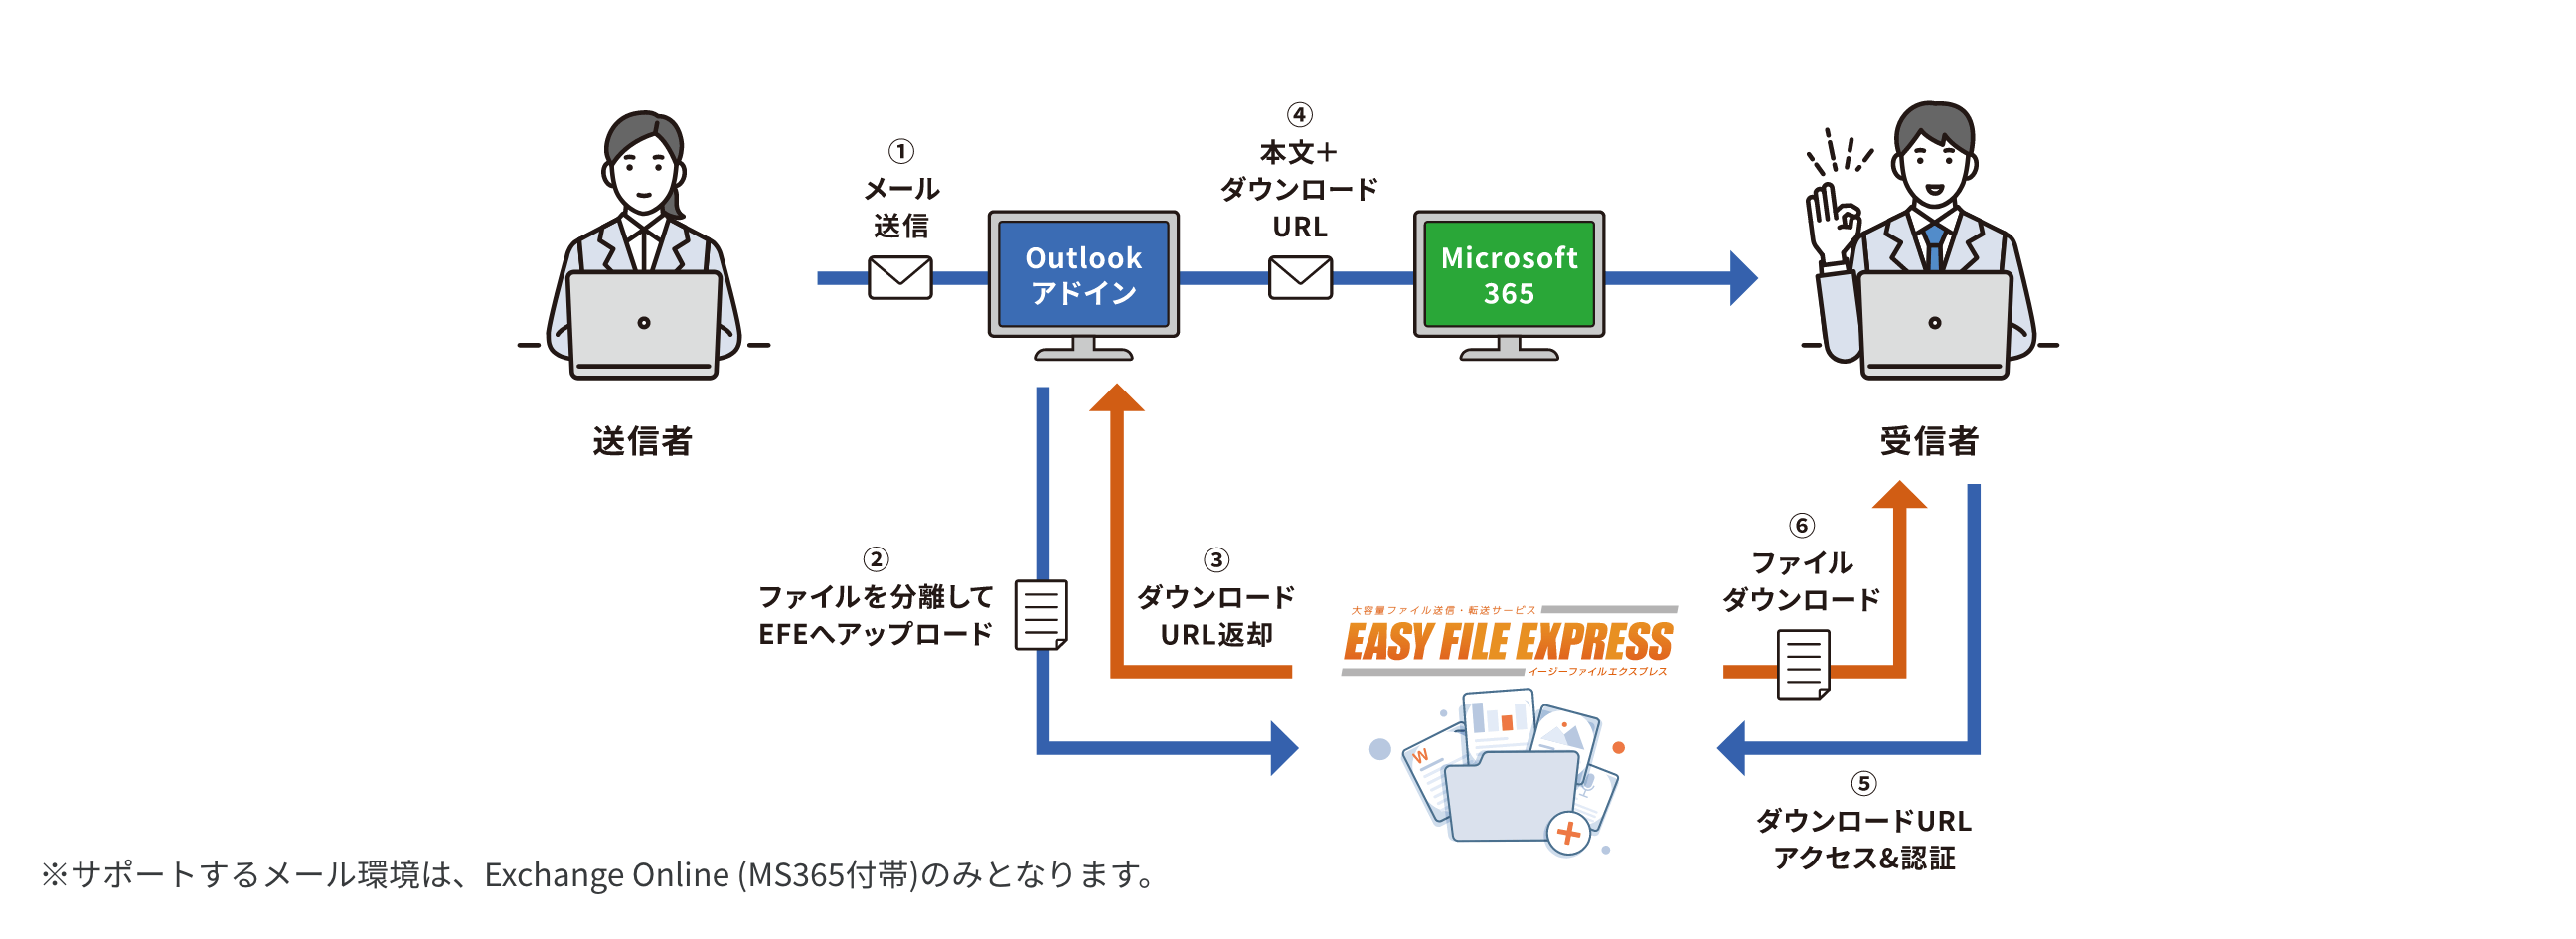 EASY FILE EXPRESS for Outlookの流れ